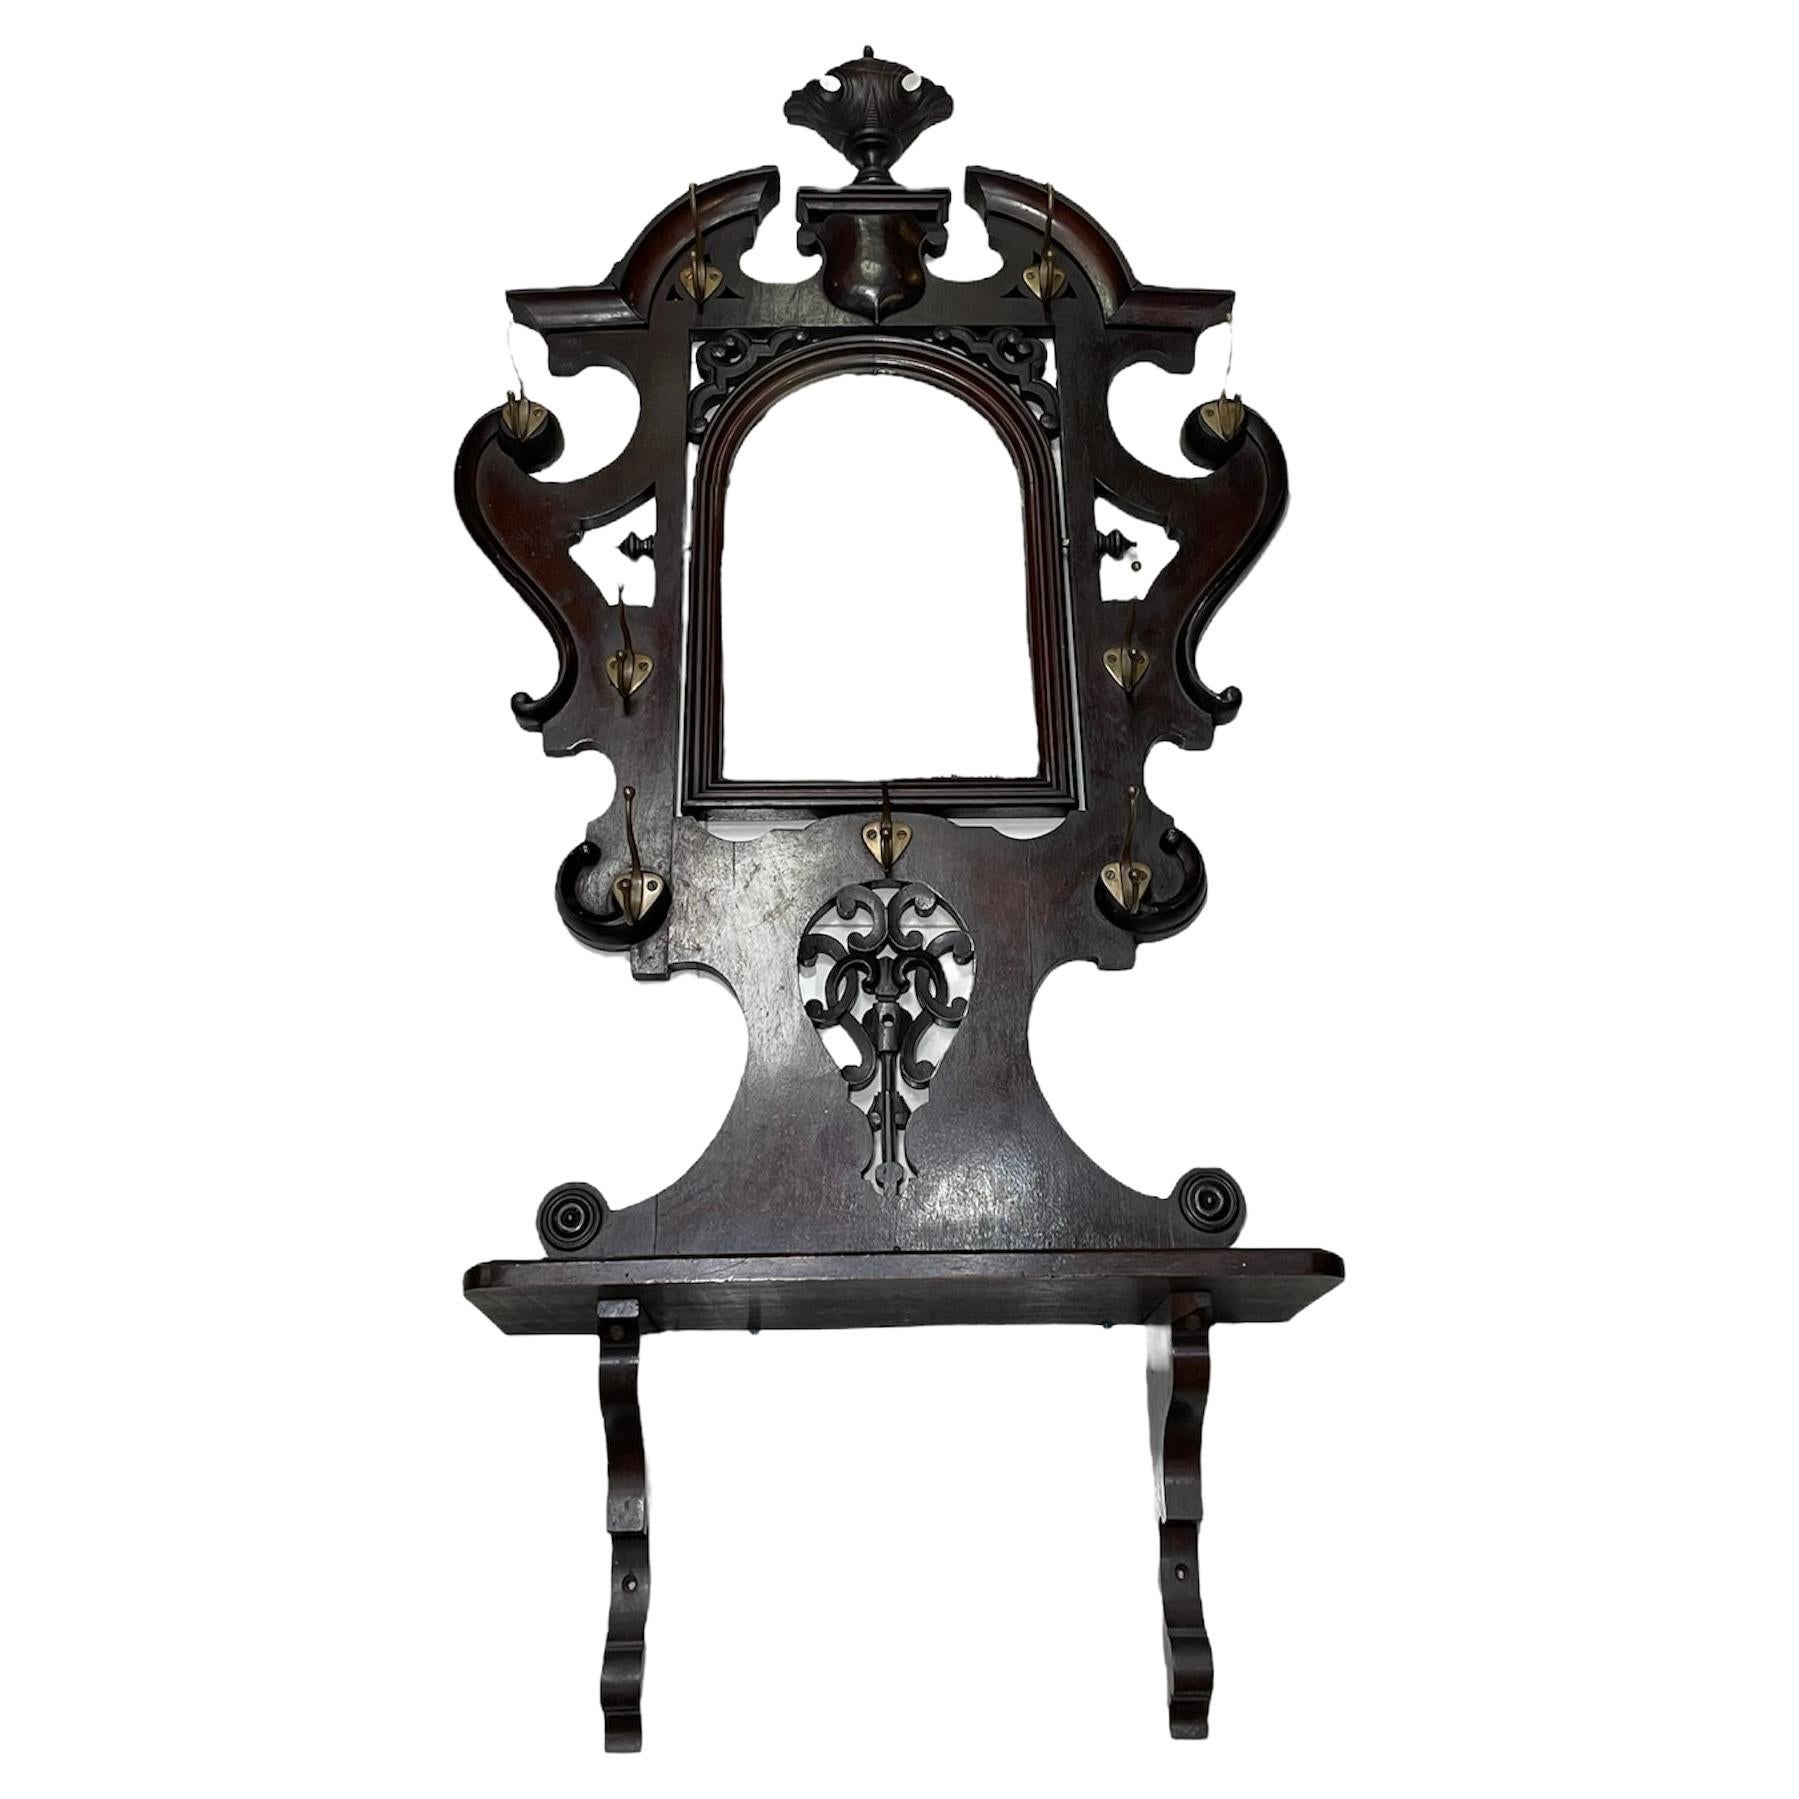 This is a a five feet and four inches tall Victorian style hall wall wood mount mirror and coat, hat, scarf and /or umbrella rack made in Puerto Rico. It depicts a semilunar shaped mirror framed with dark brown wood. Above the mirror, there is a